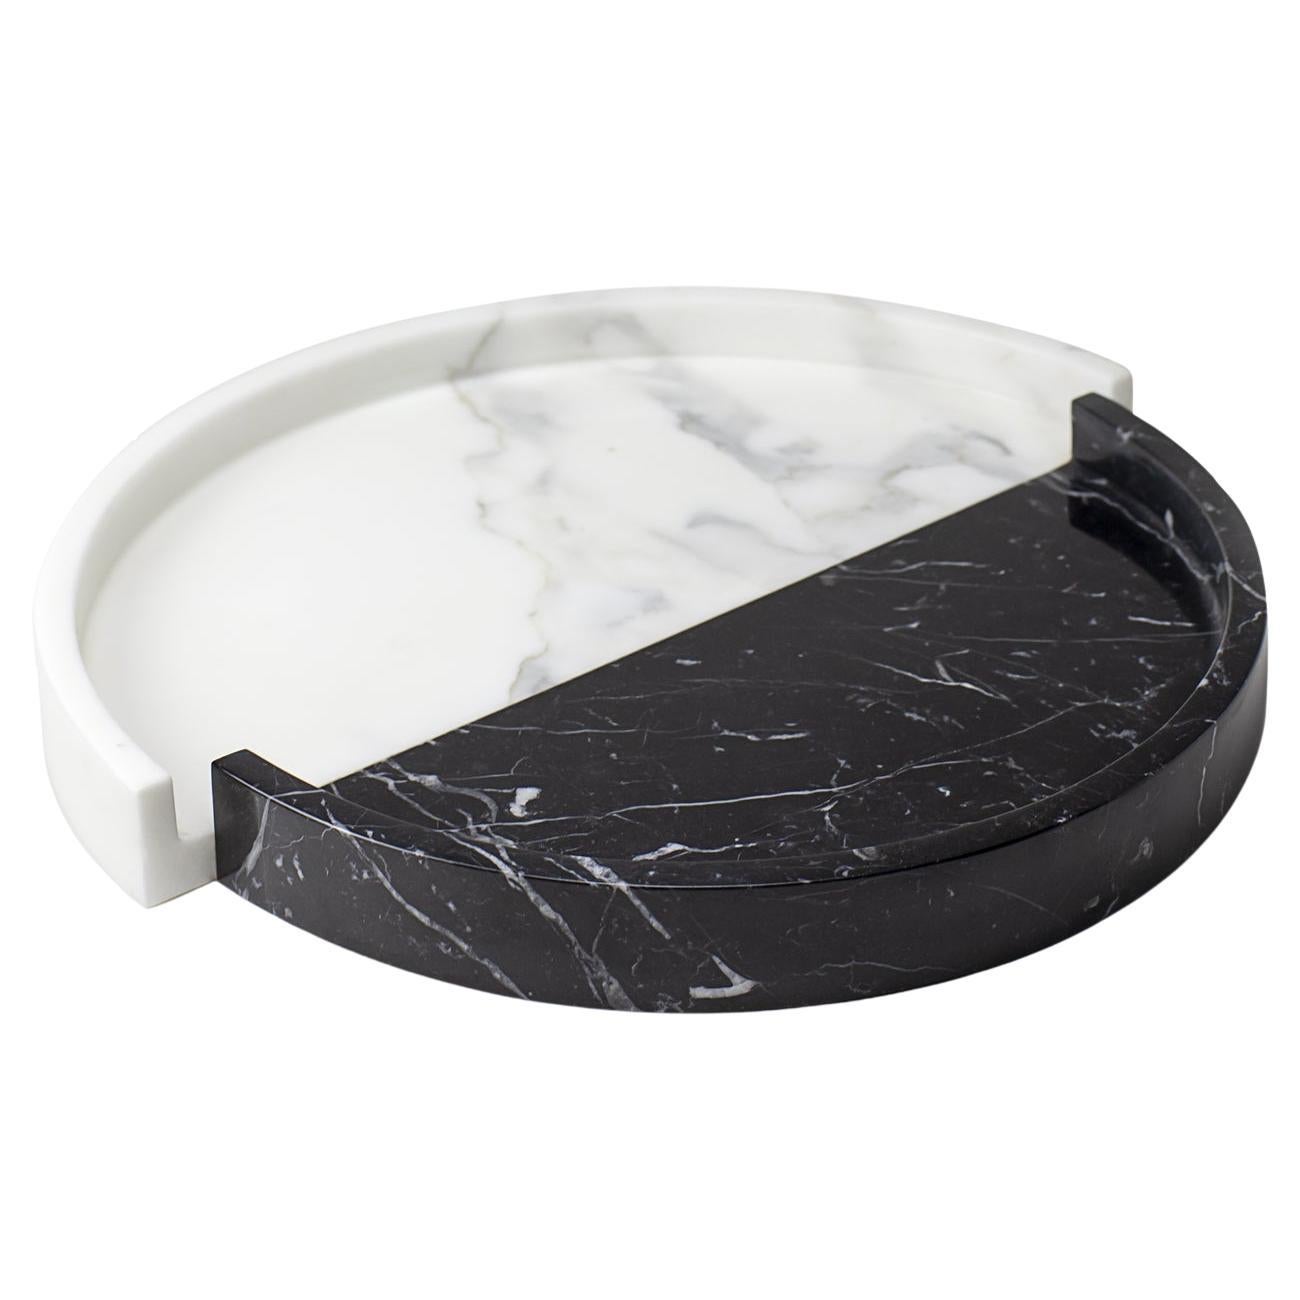 Italian Marble Tray in Black and White, Minimalist Modern Design by Sandro Lopez